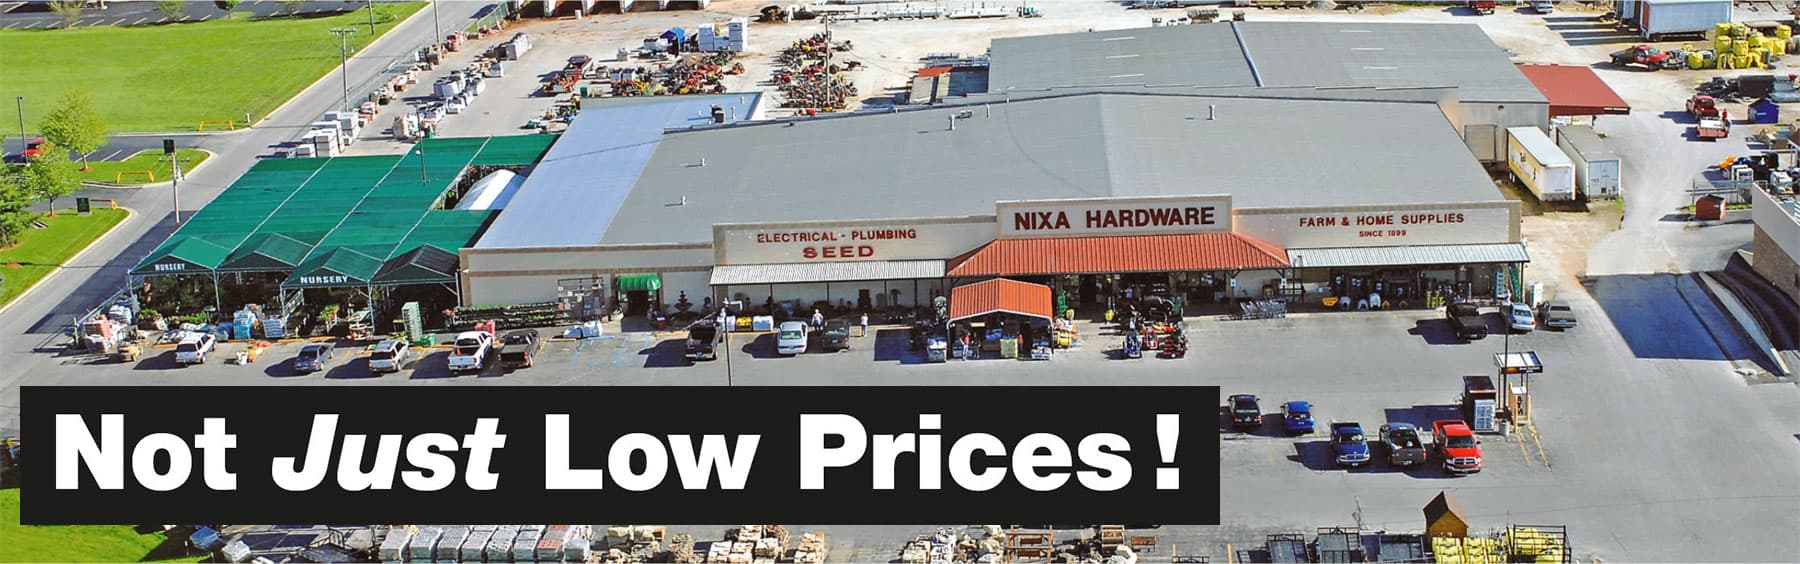 Nixa Hardware & Seed Company Tag Line - Not Just Low Prices